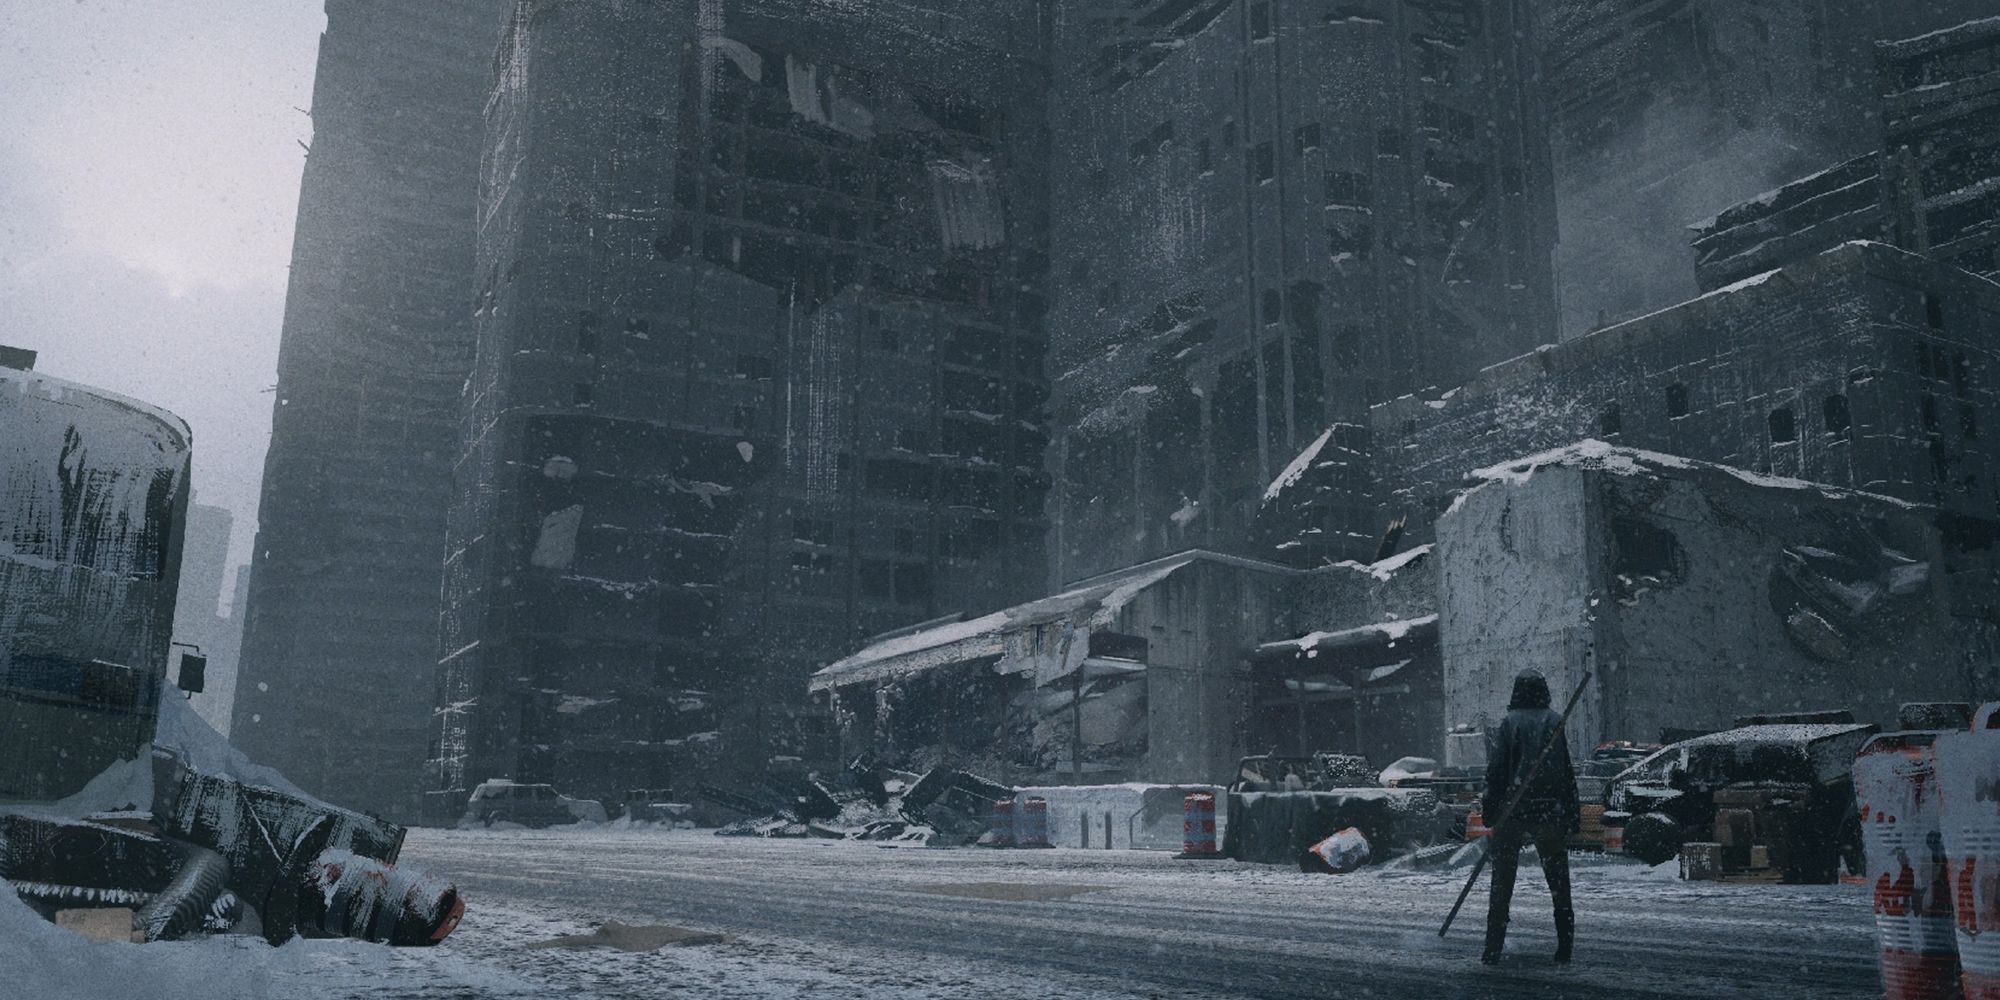 Nier Replicant - A Concept Art Of The Ash Falling That Looks Like Snow